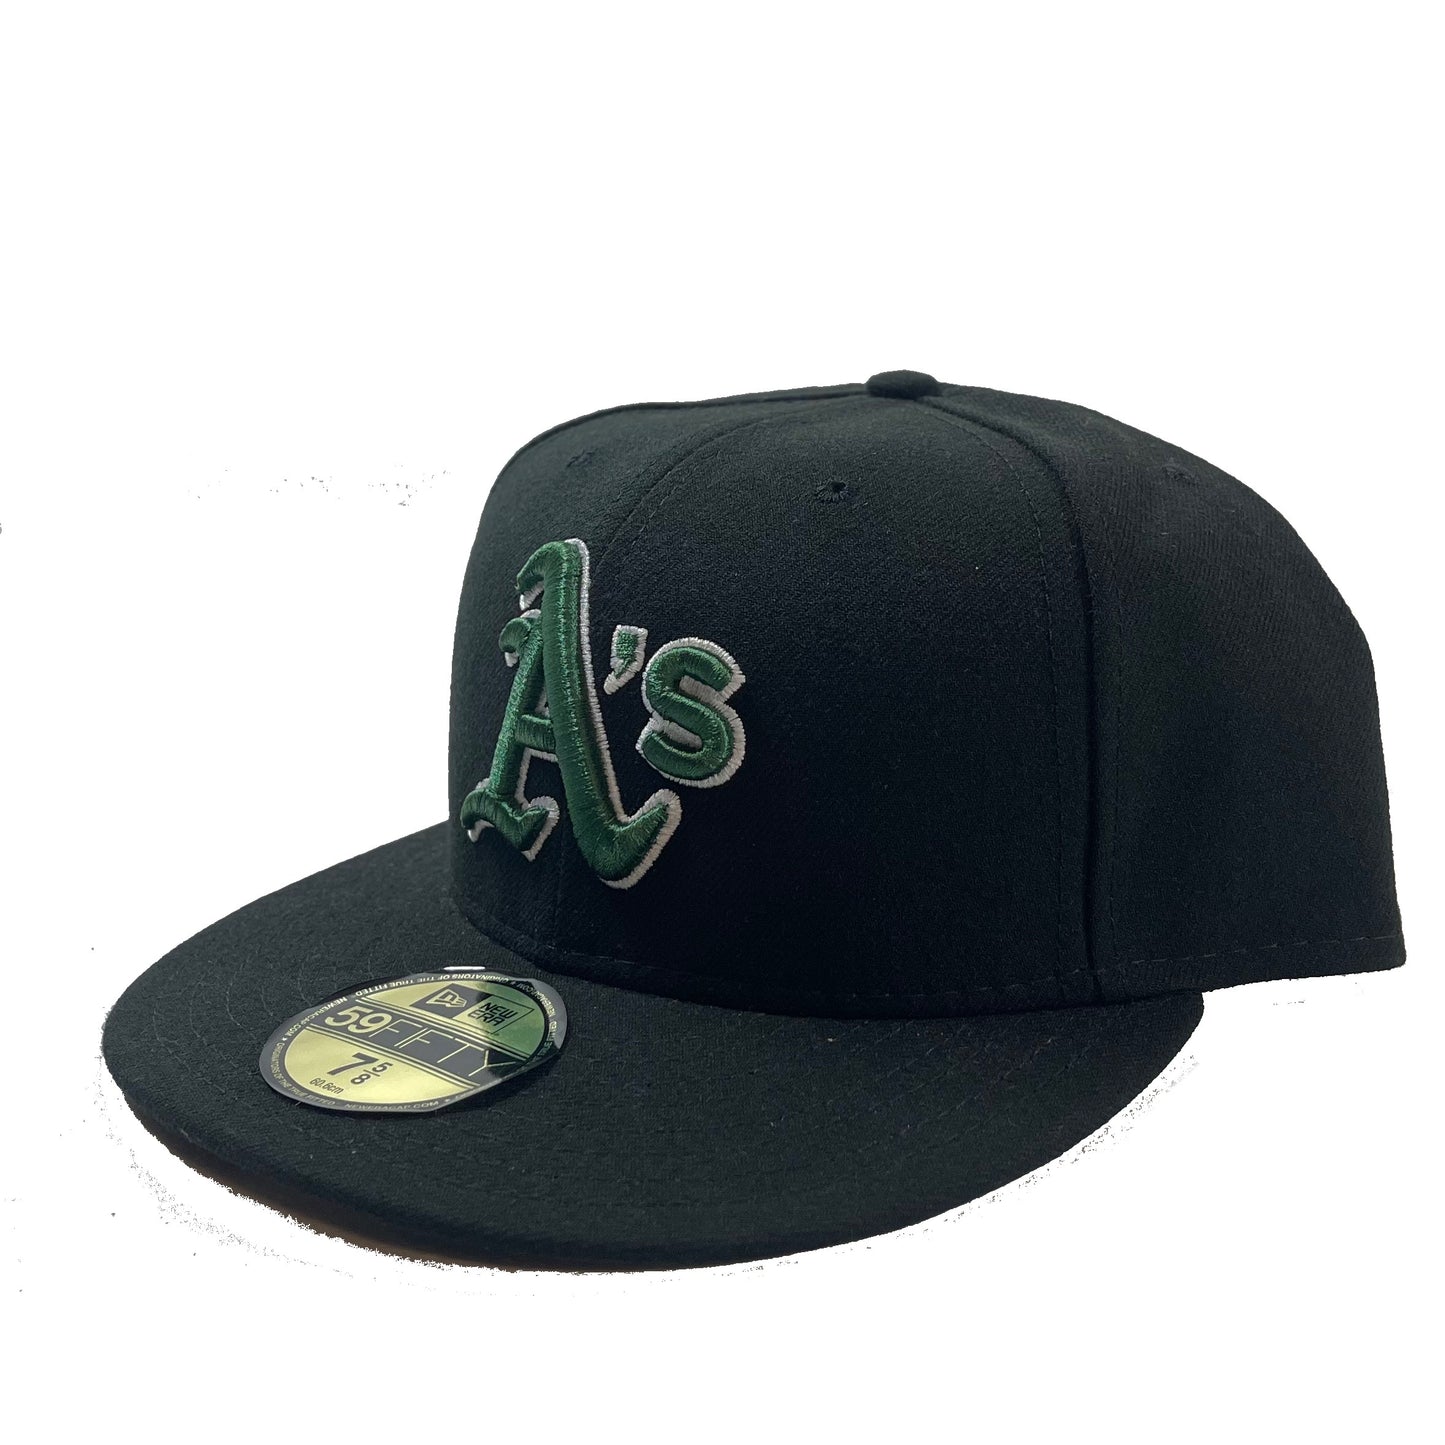 Oakland Athletic's (Black) Fitted